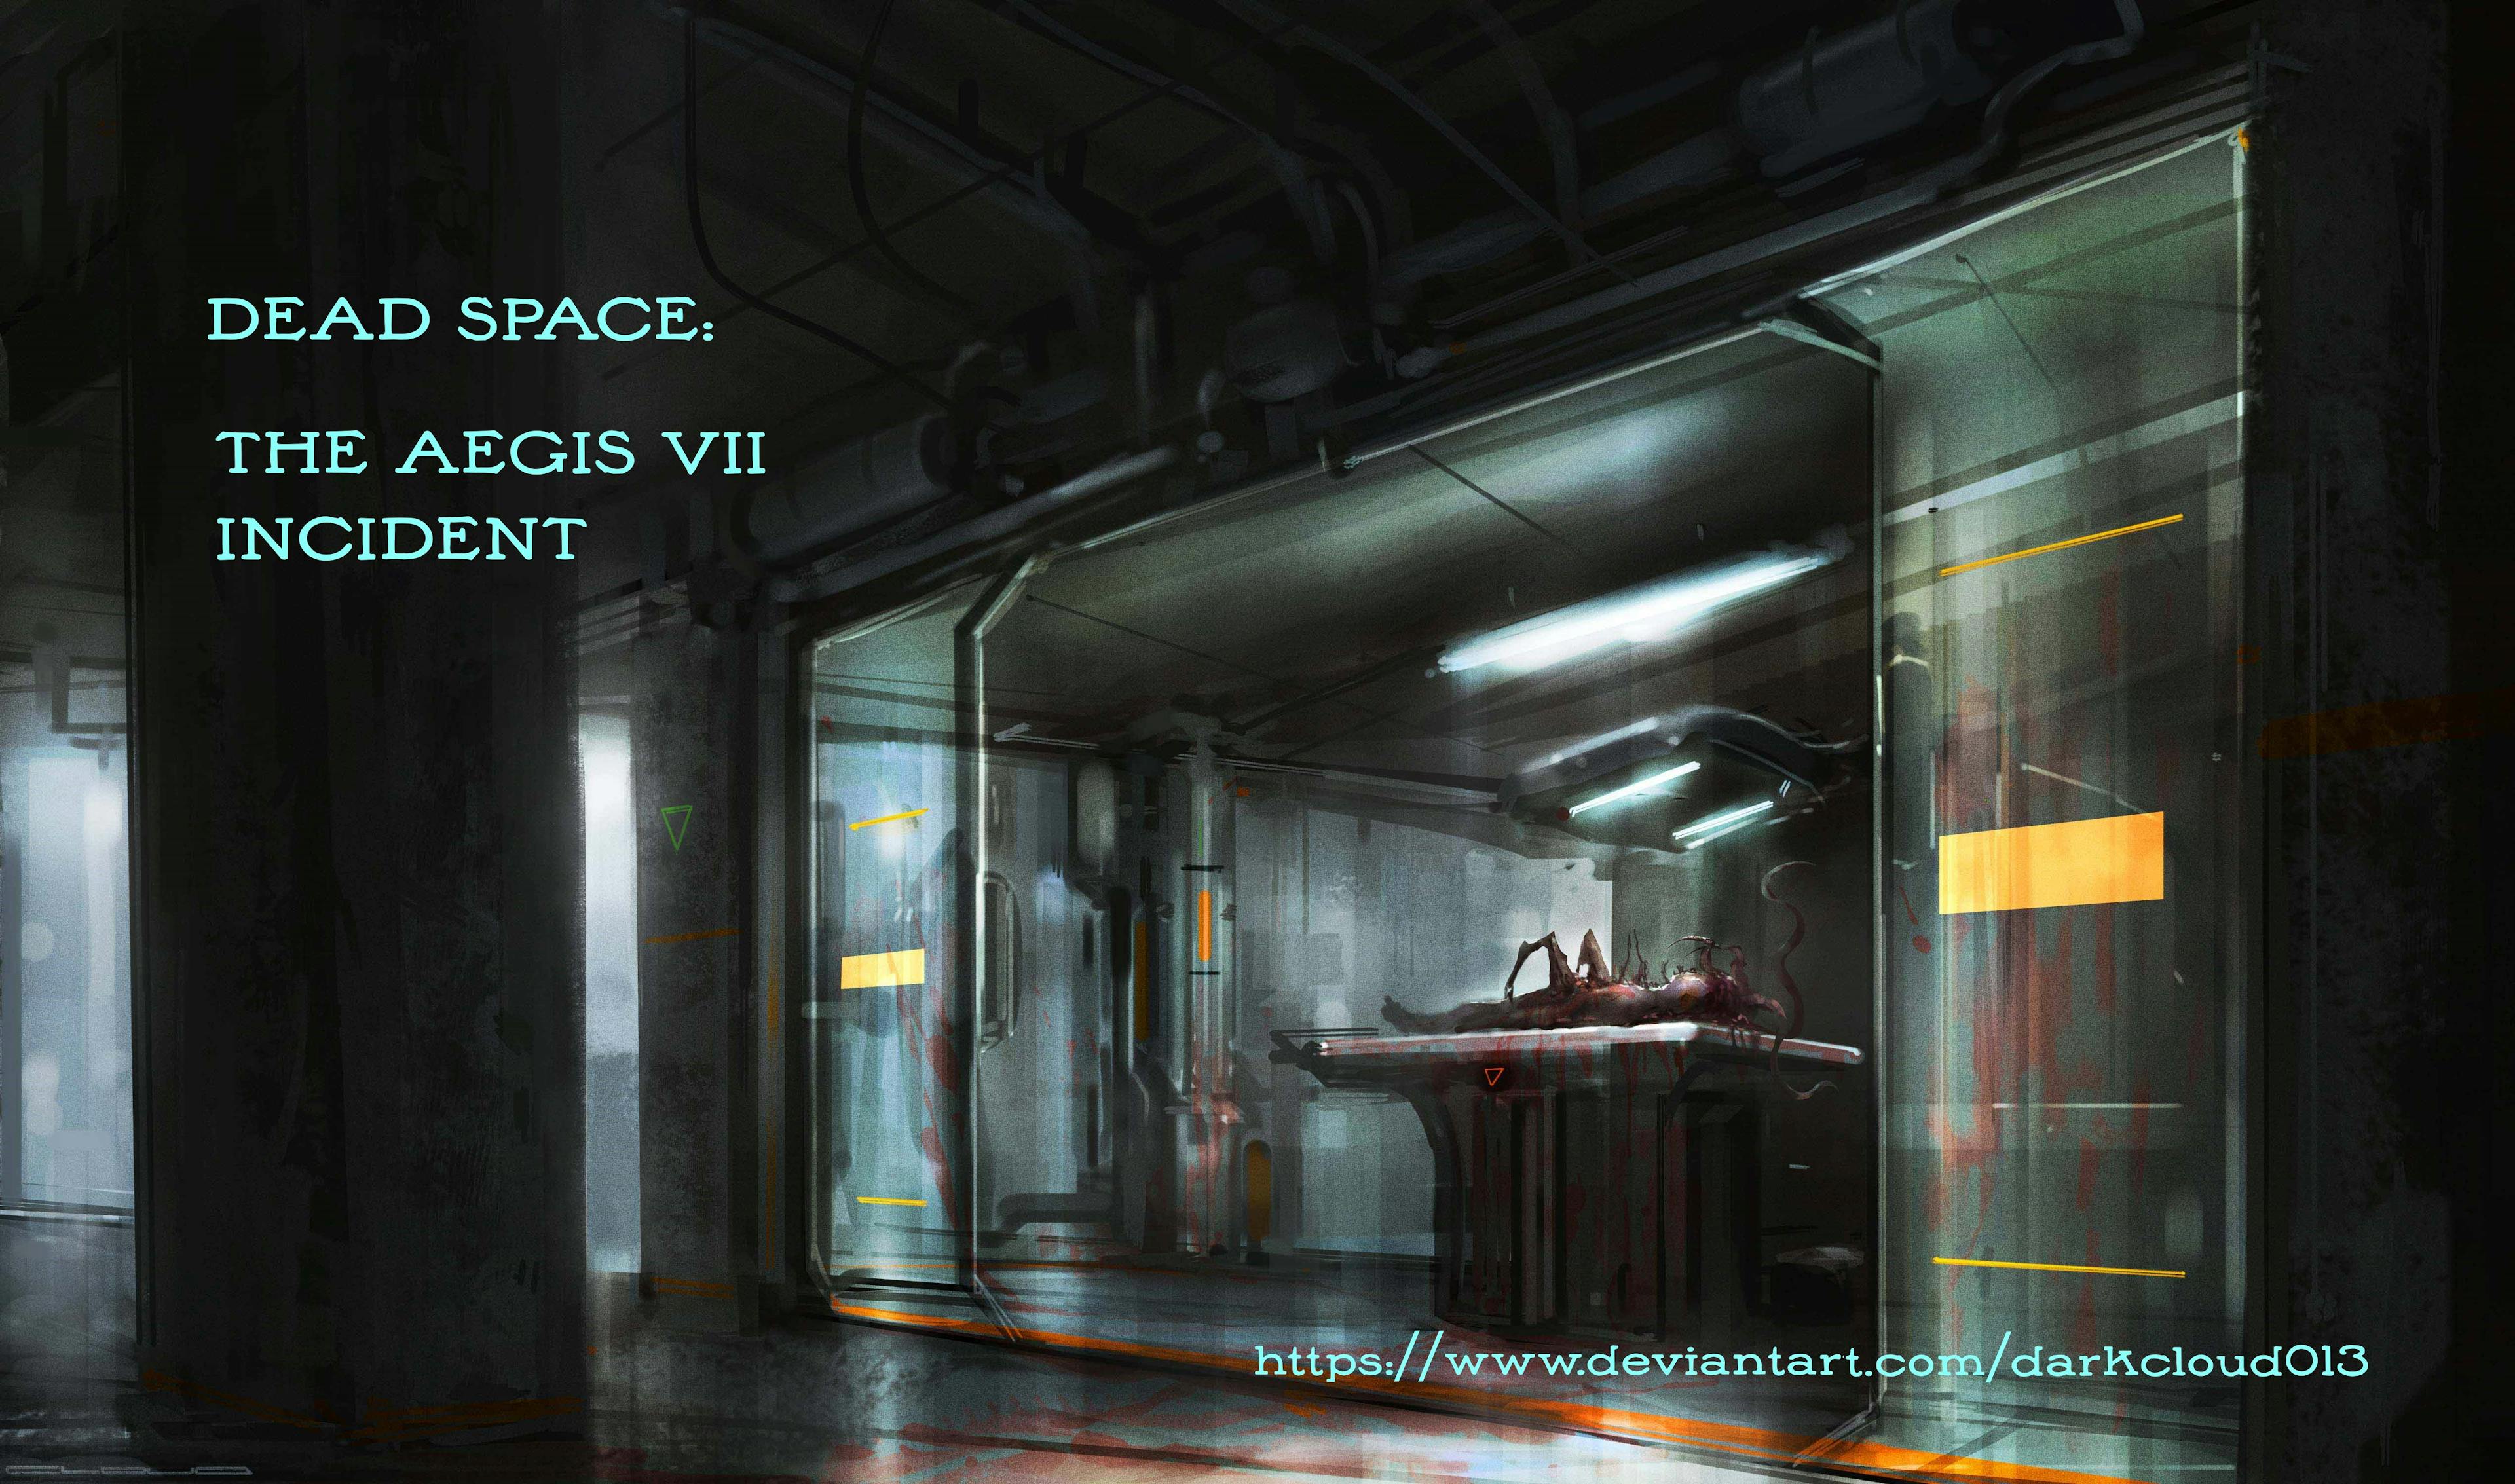 DEAD SPACE - The Aegis VII Incident - A Prequel to the Events of Dead Space